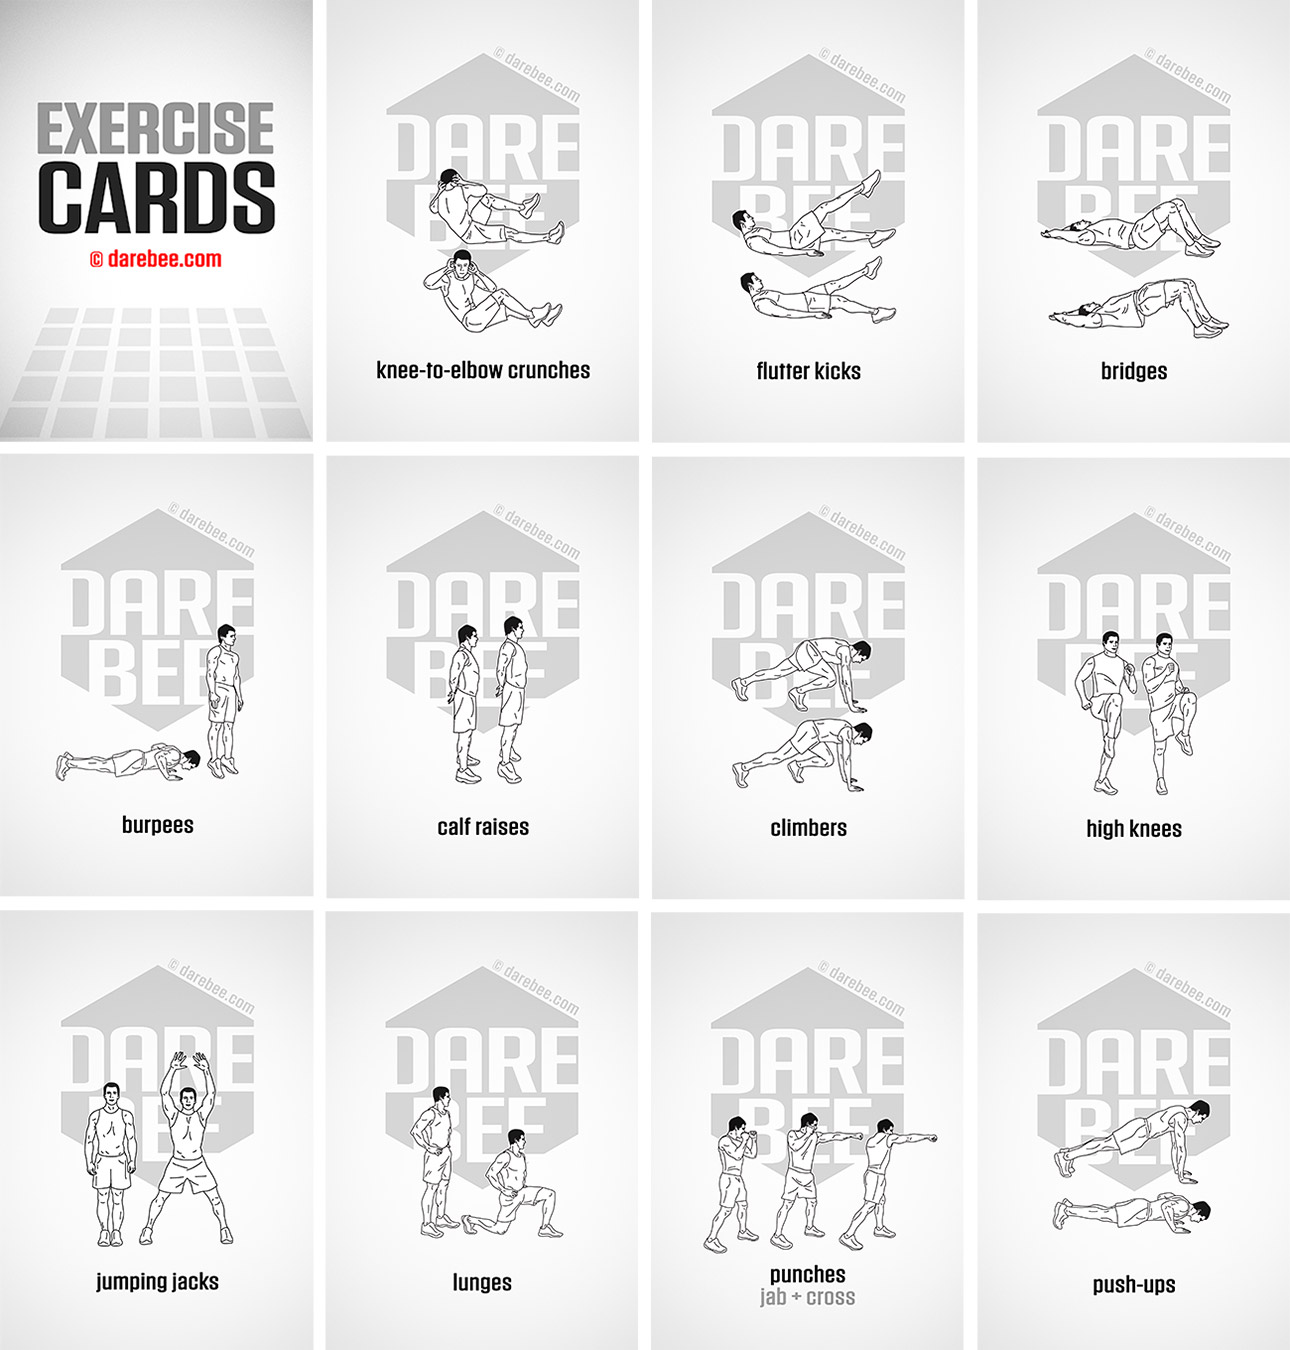 exercise-cards-by-darebee